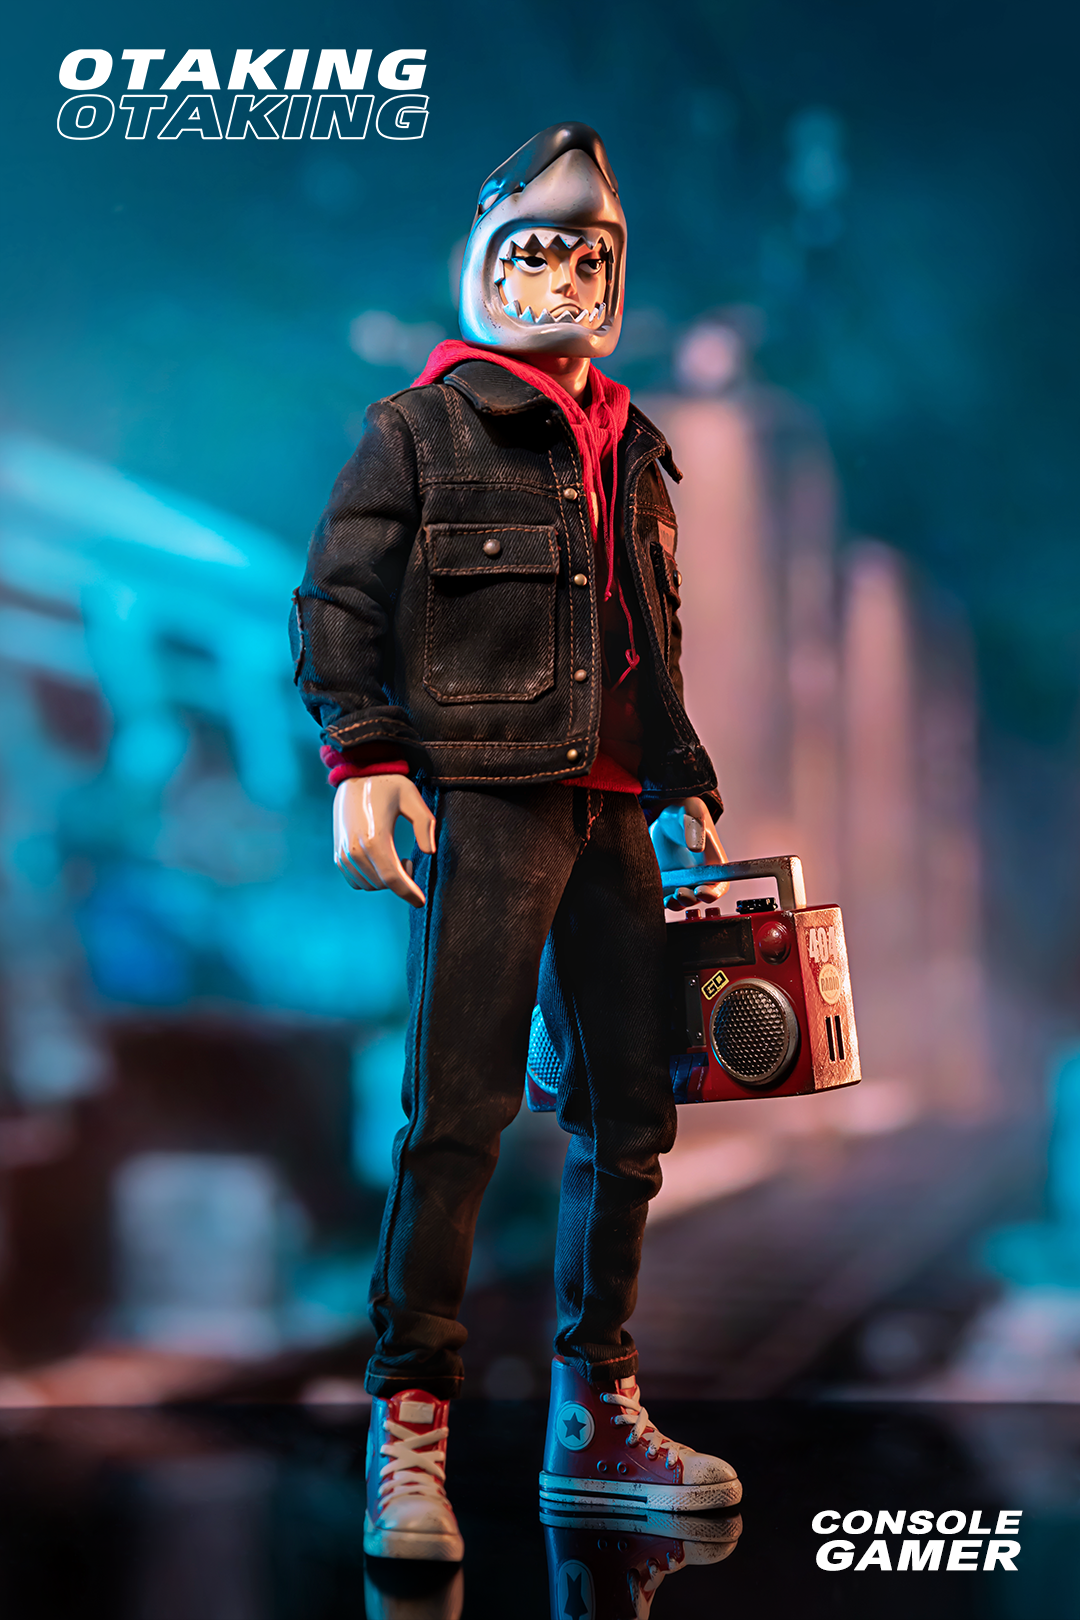 Action figure holding radio, close-up of toy with jacket, shoes, and accessories - OTAKING - Console Gamer.